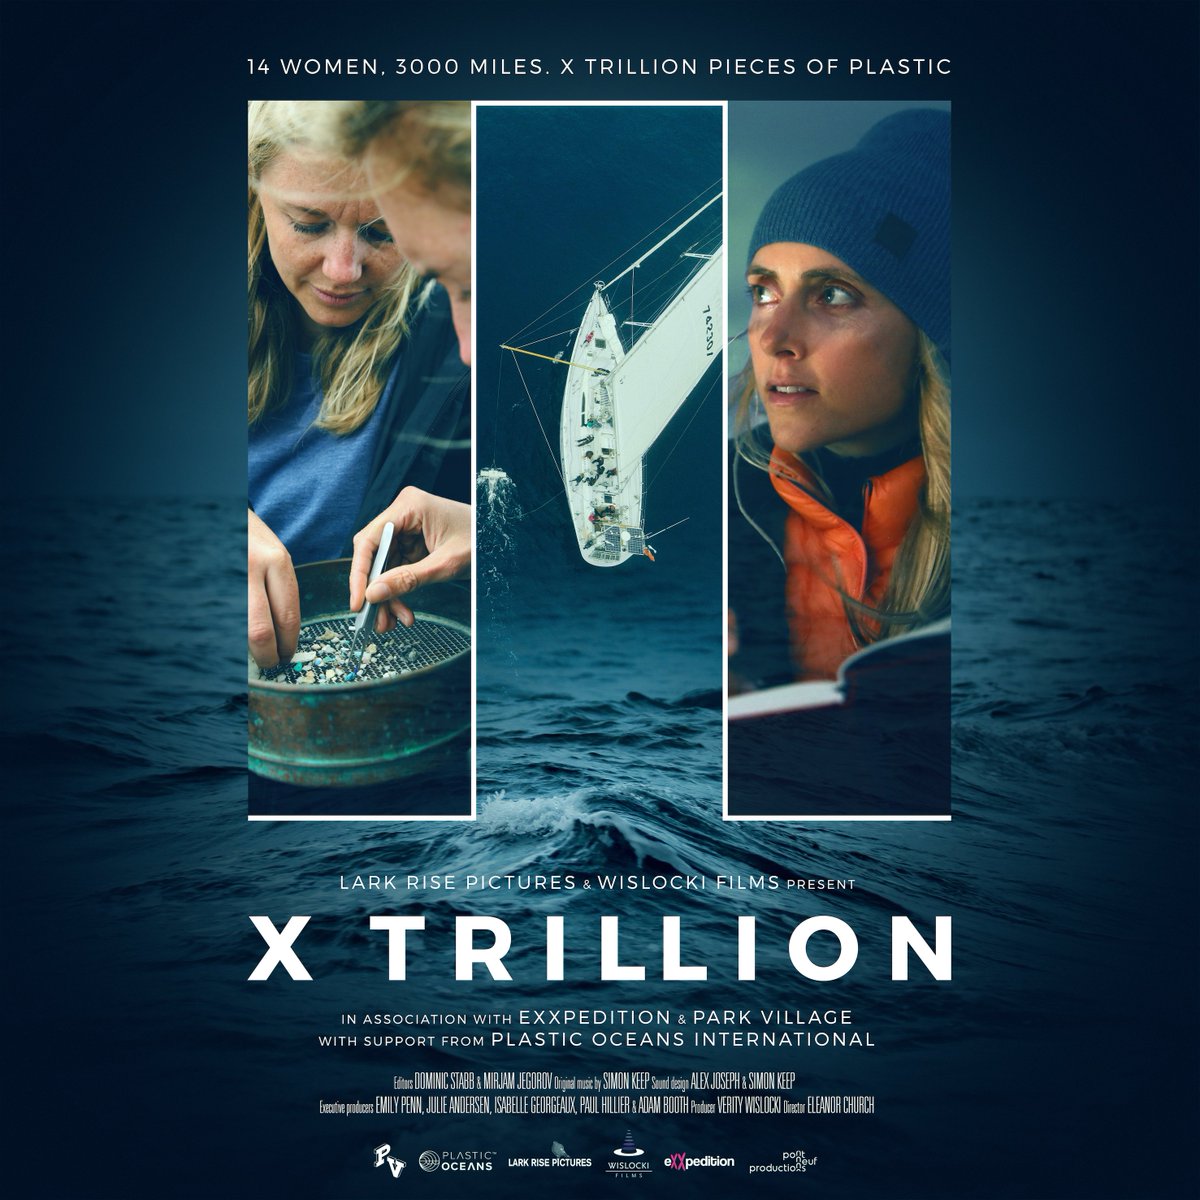 Join us for the premiere of #XTrillionFilm, a gripping documentary crafted by the talented @LarkRisePicture. Prepare to be moved, inspired, and challenged as we confront the pressing issue of #plasticpollution head-on. Secure your spot here 🎟️ shorturl.at/cAFR9